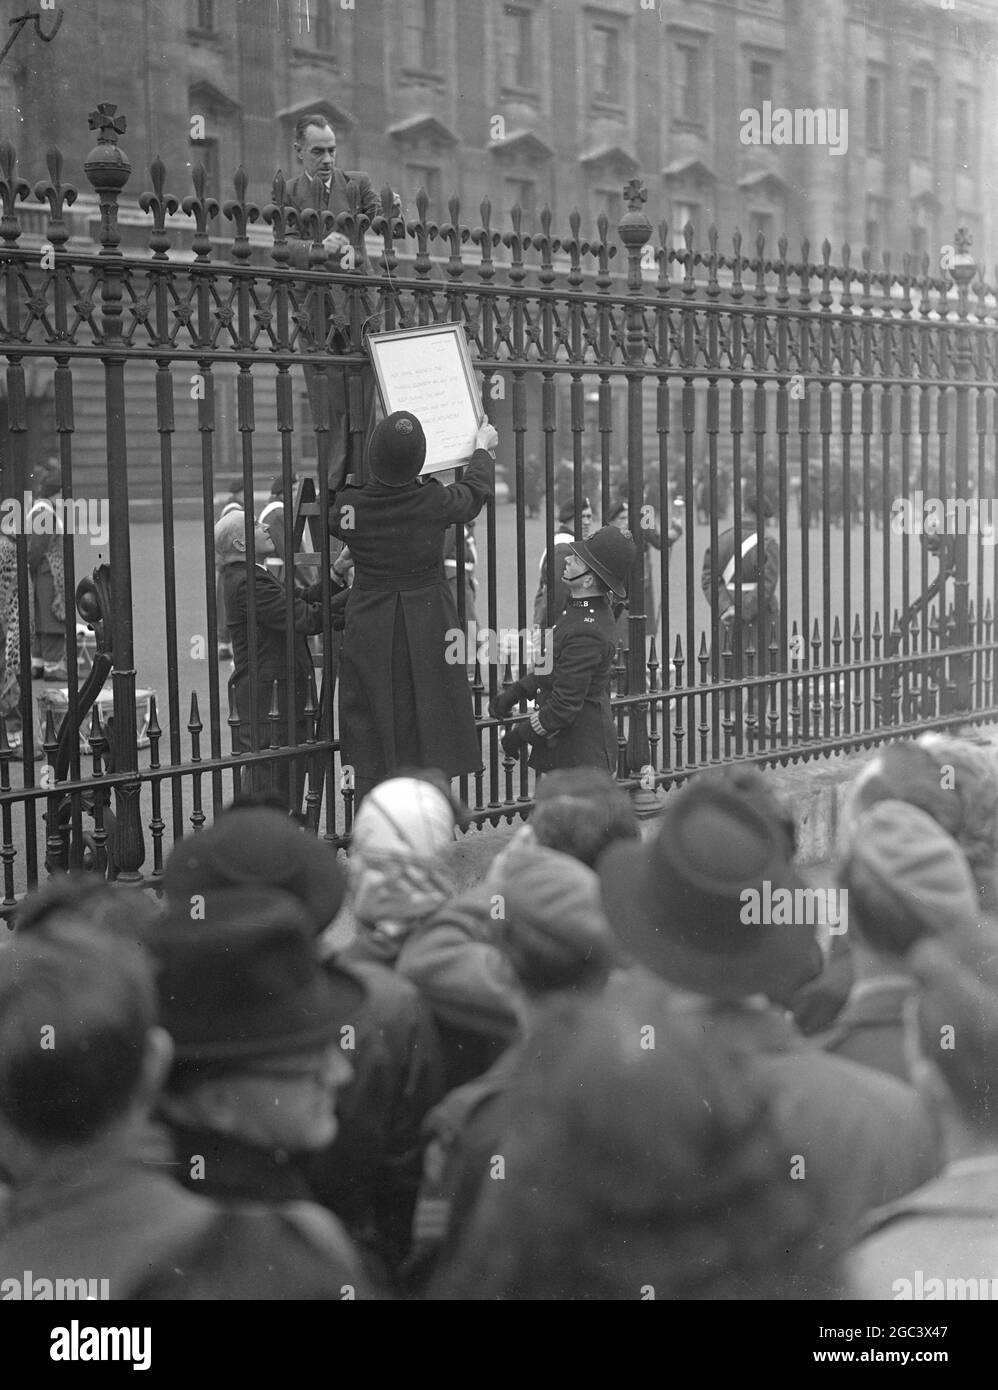 PRINCESS AND INFANT SATISFACTORY The waiting crowds outside Buckingham Palace , London surged forward to read the latest bulletin posted on the railings there. The bulletin read '' Princess Elizabeth has had some sleep during the night . Her condition and that of the infant Prince is satisfactory '' PICTURE SHOWS:- Placing this morning's bulletin on the Buckingham Palace railings . 15 November 1948 Stock Photo